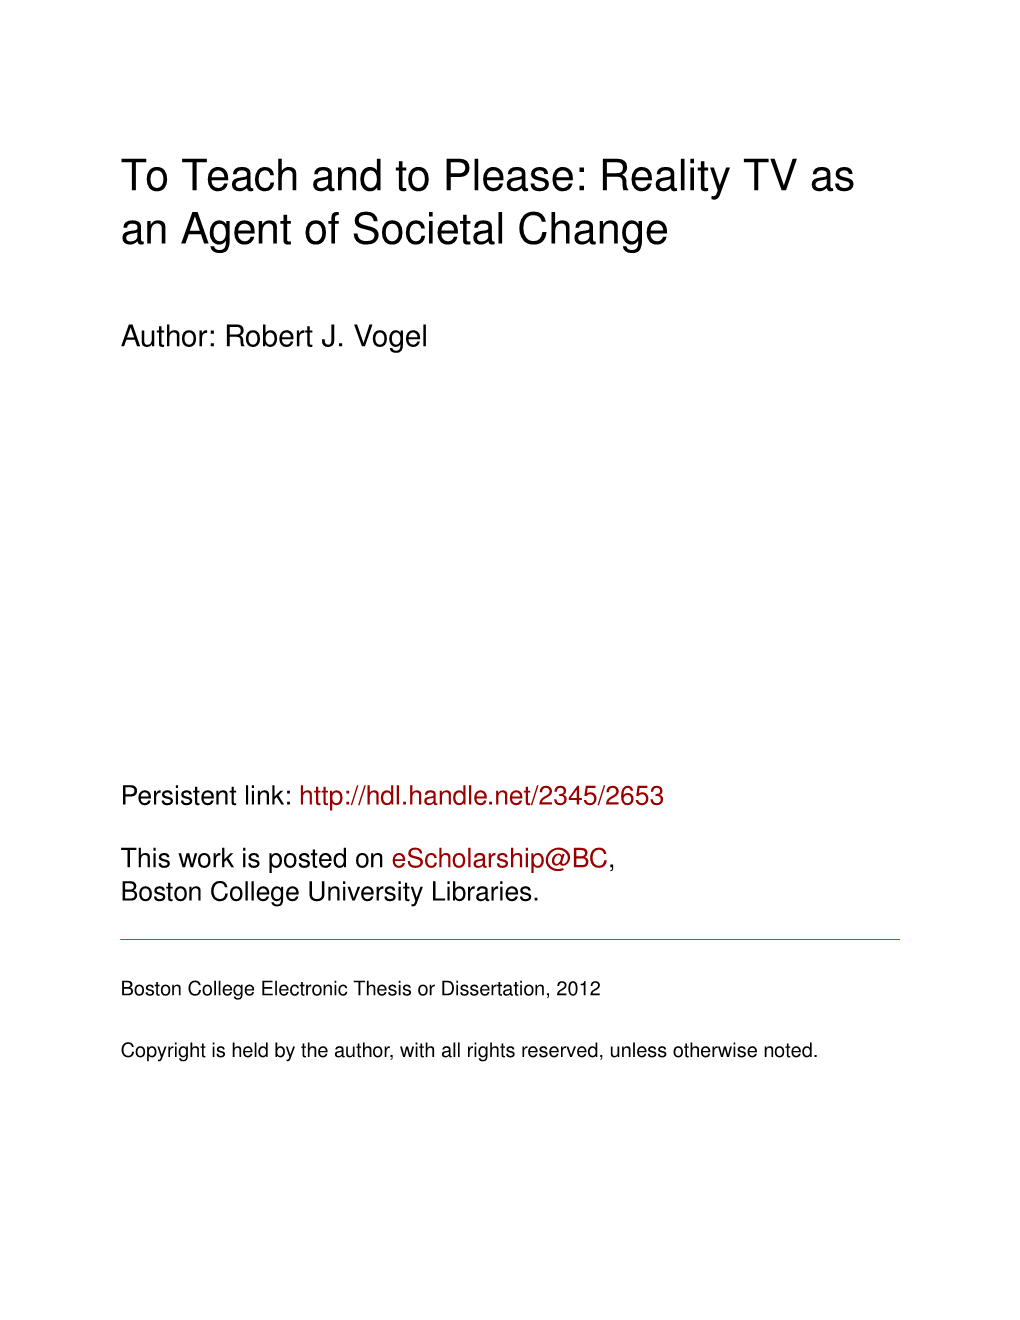 To Teach and to Please: Reality TV As an Agent of Societal Change